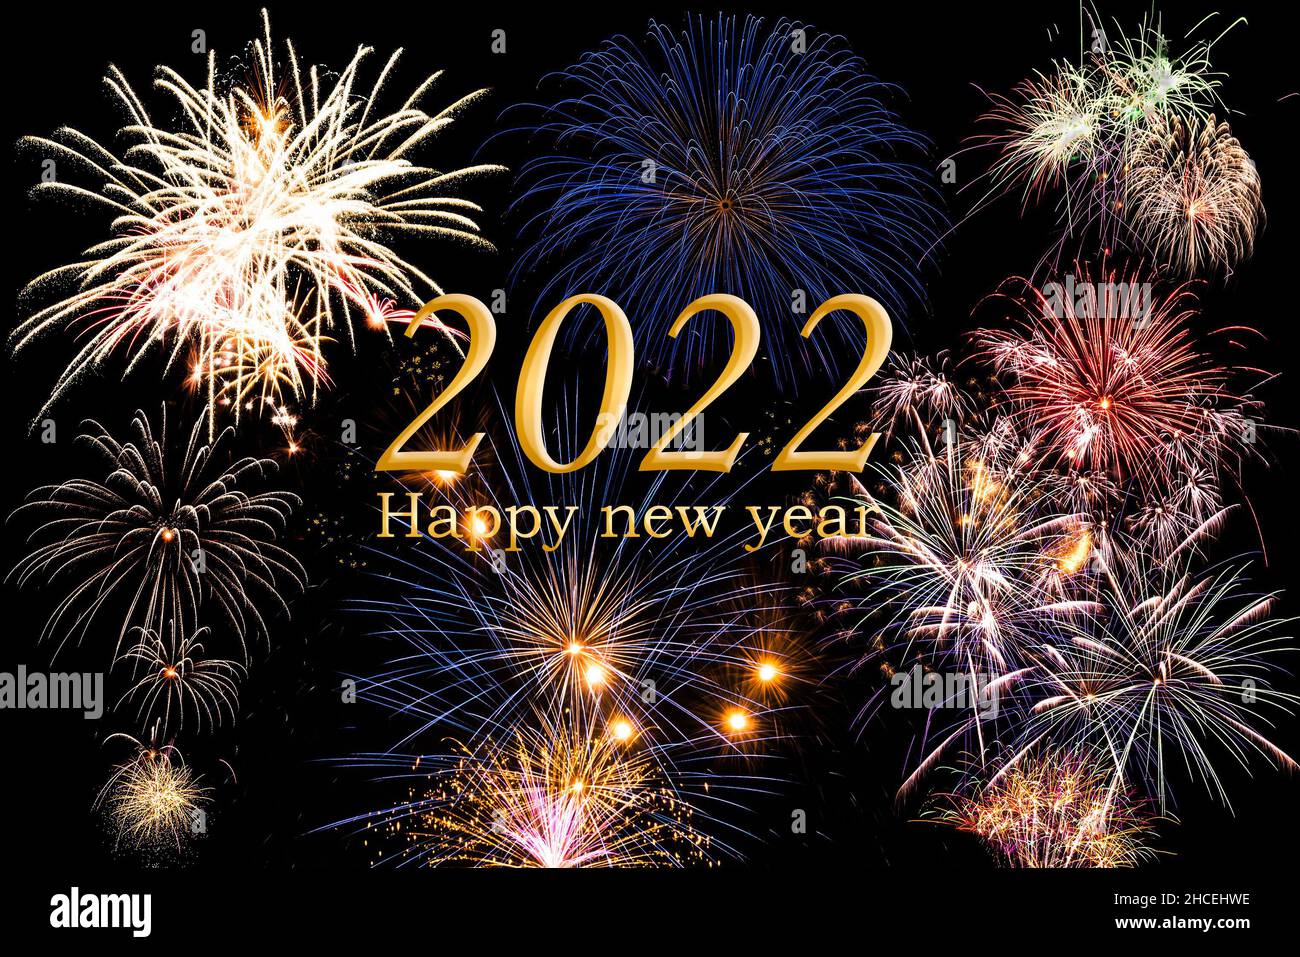 Happy new year 2022. Text and numer in golden colour with bright fireworks agianst dark sky in background. Stock Photo